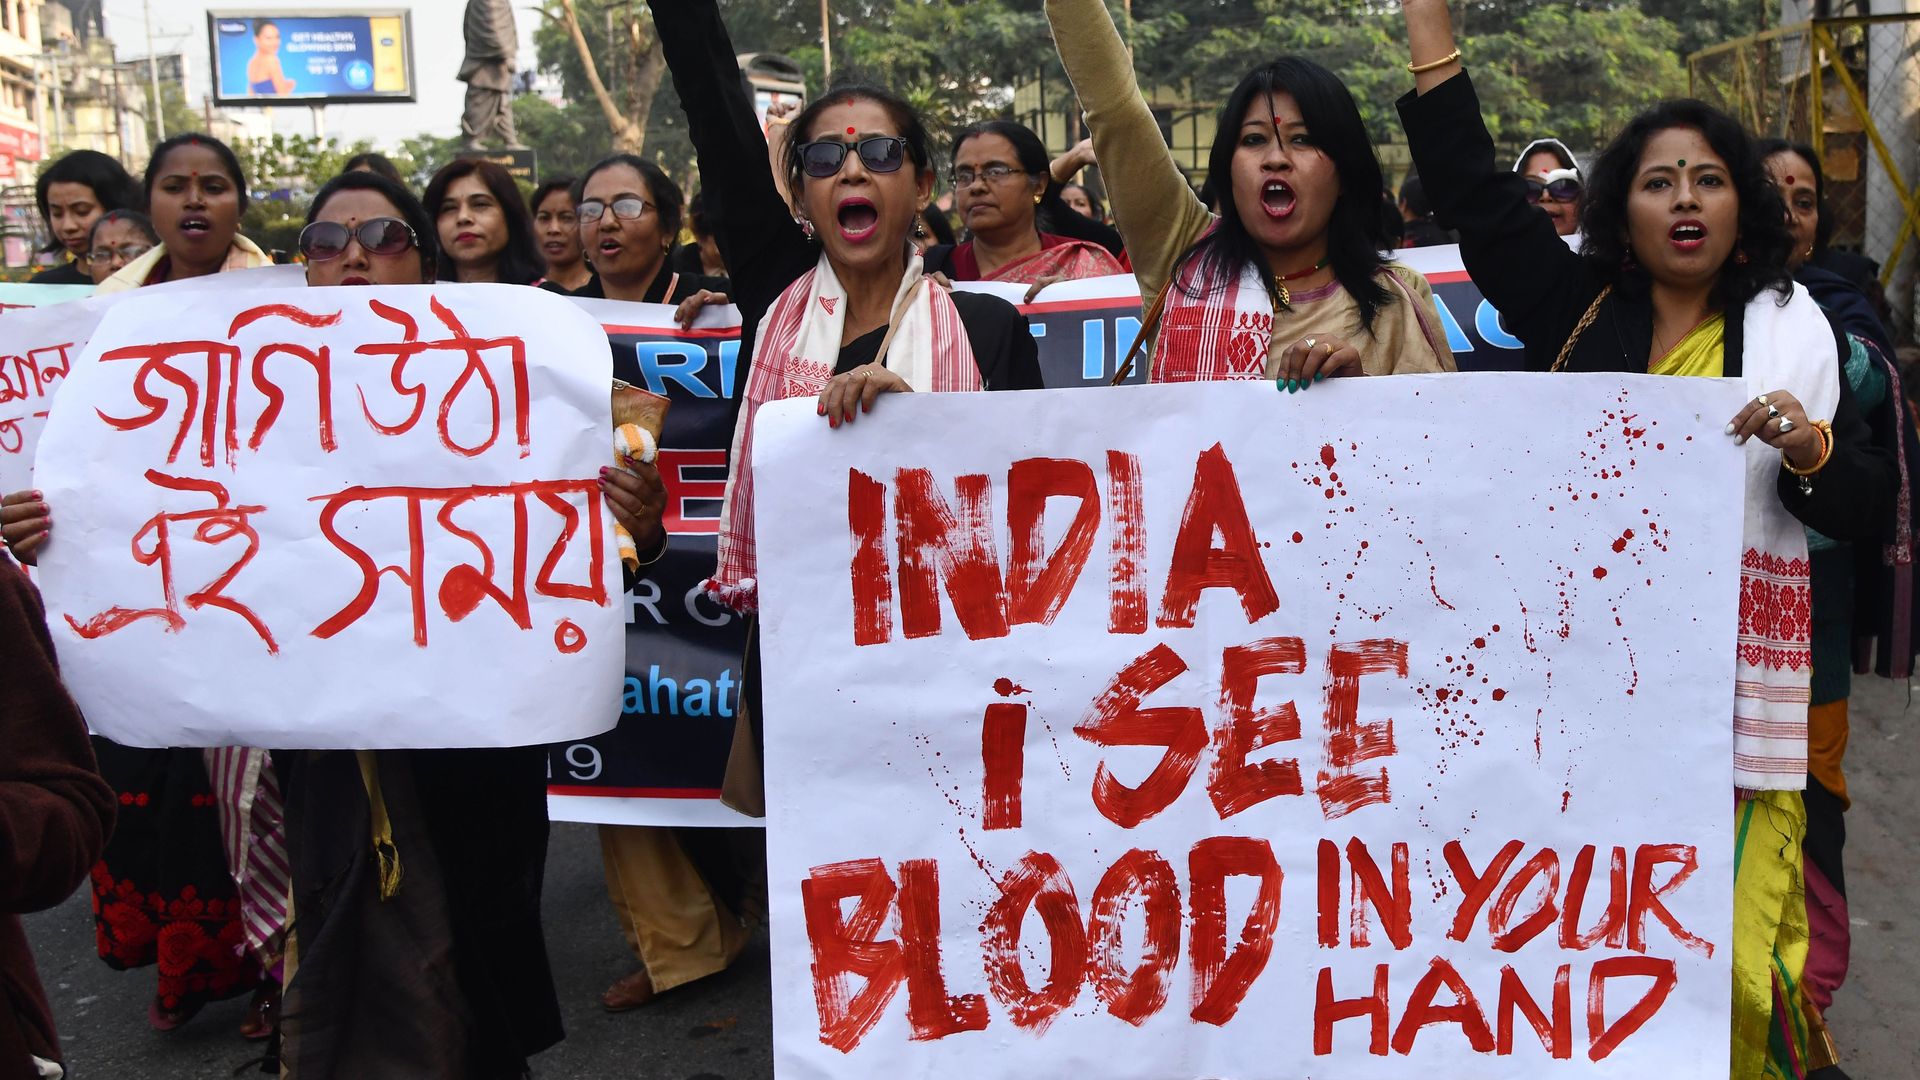 Women protesting in India hold a sign that says "India I see blood in your hands."